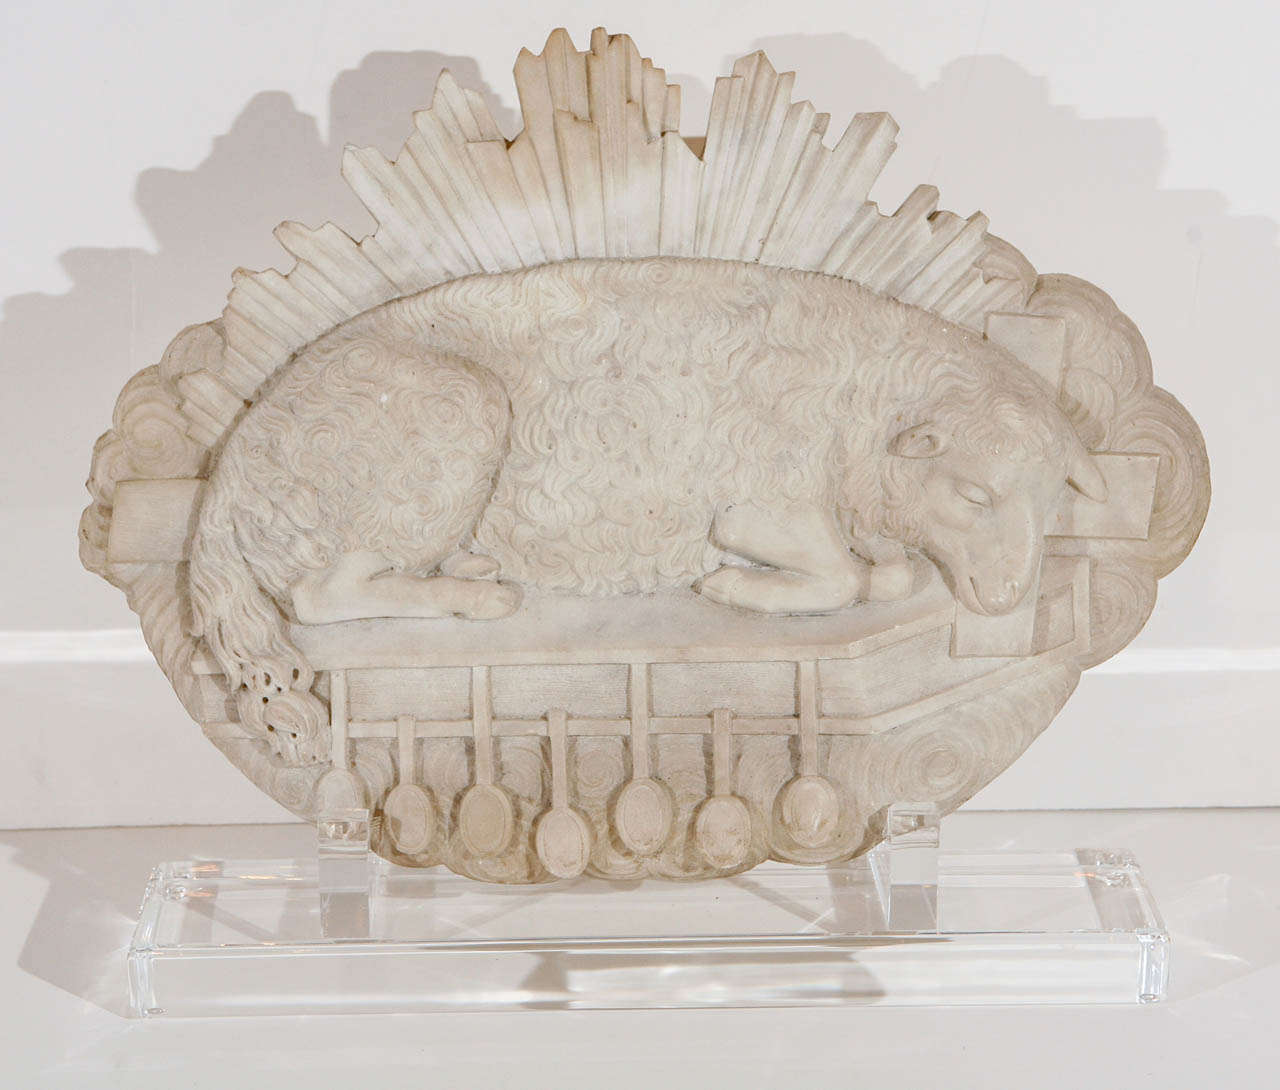 Hand-carved, Cararra marble relief of the lamb of God above the seven seals of the Apocalypse mounted on a custom, Lucite base.